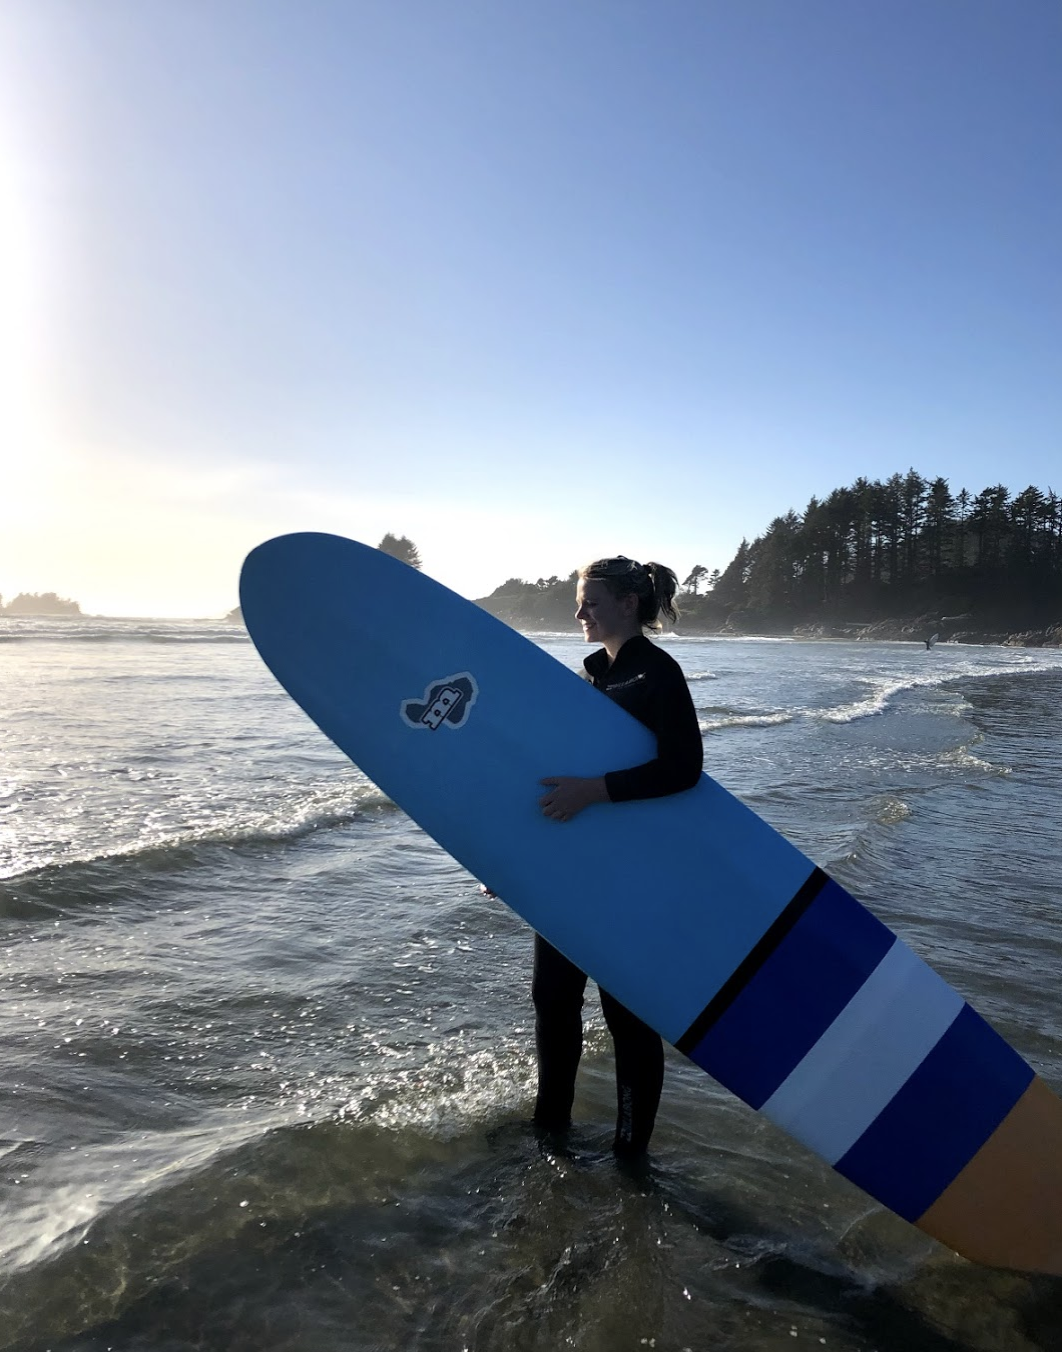 Surfing in Tofino, Vancouver Island